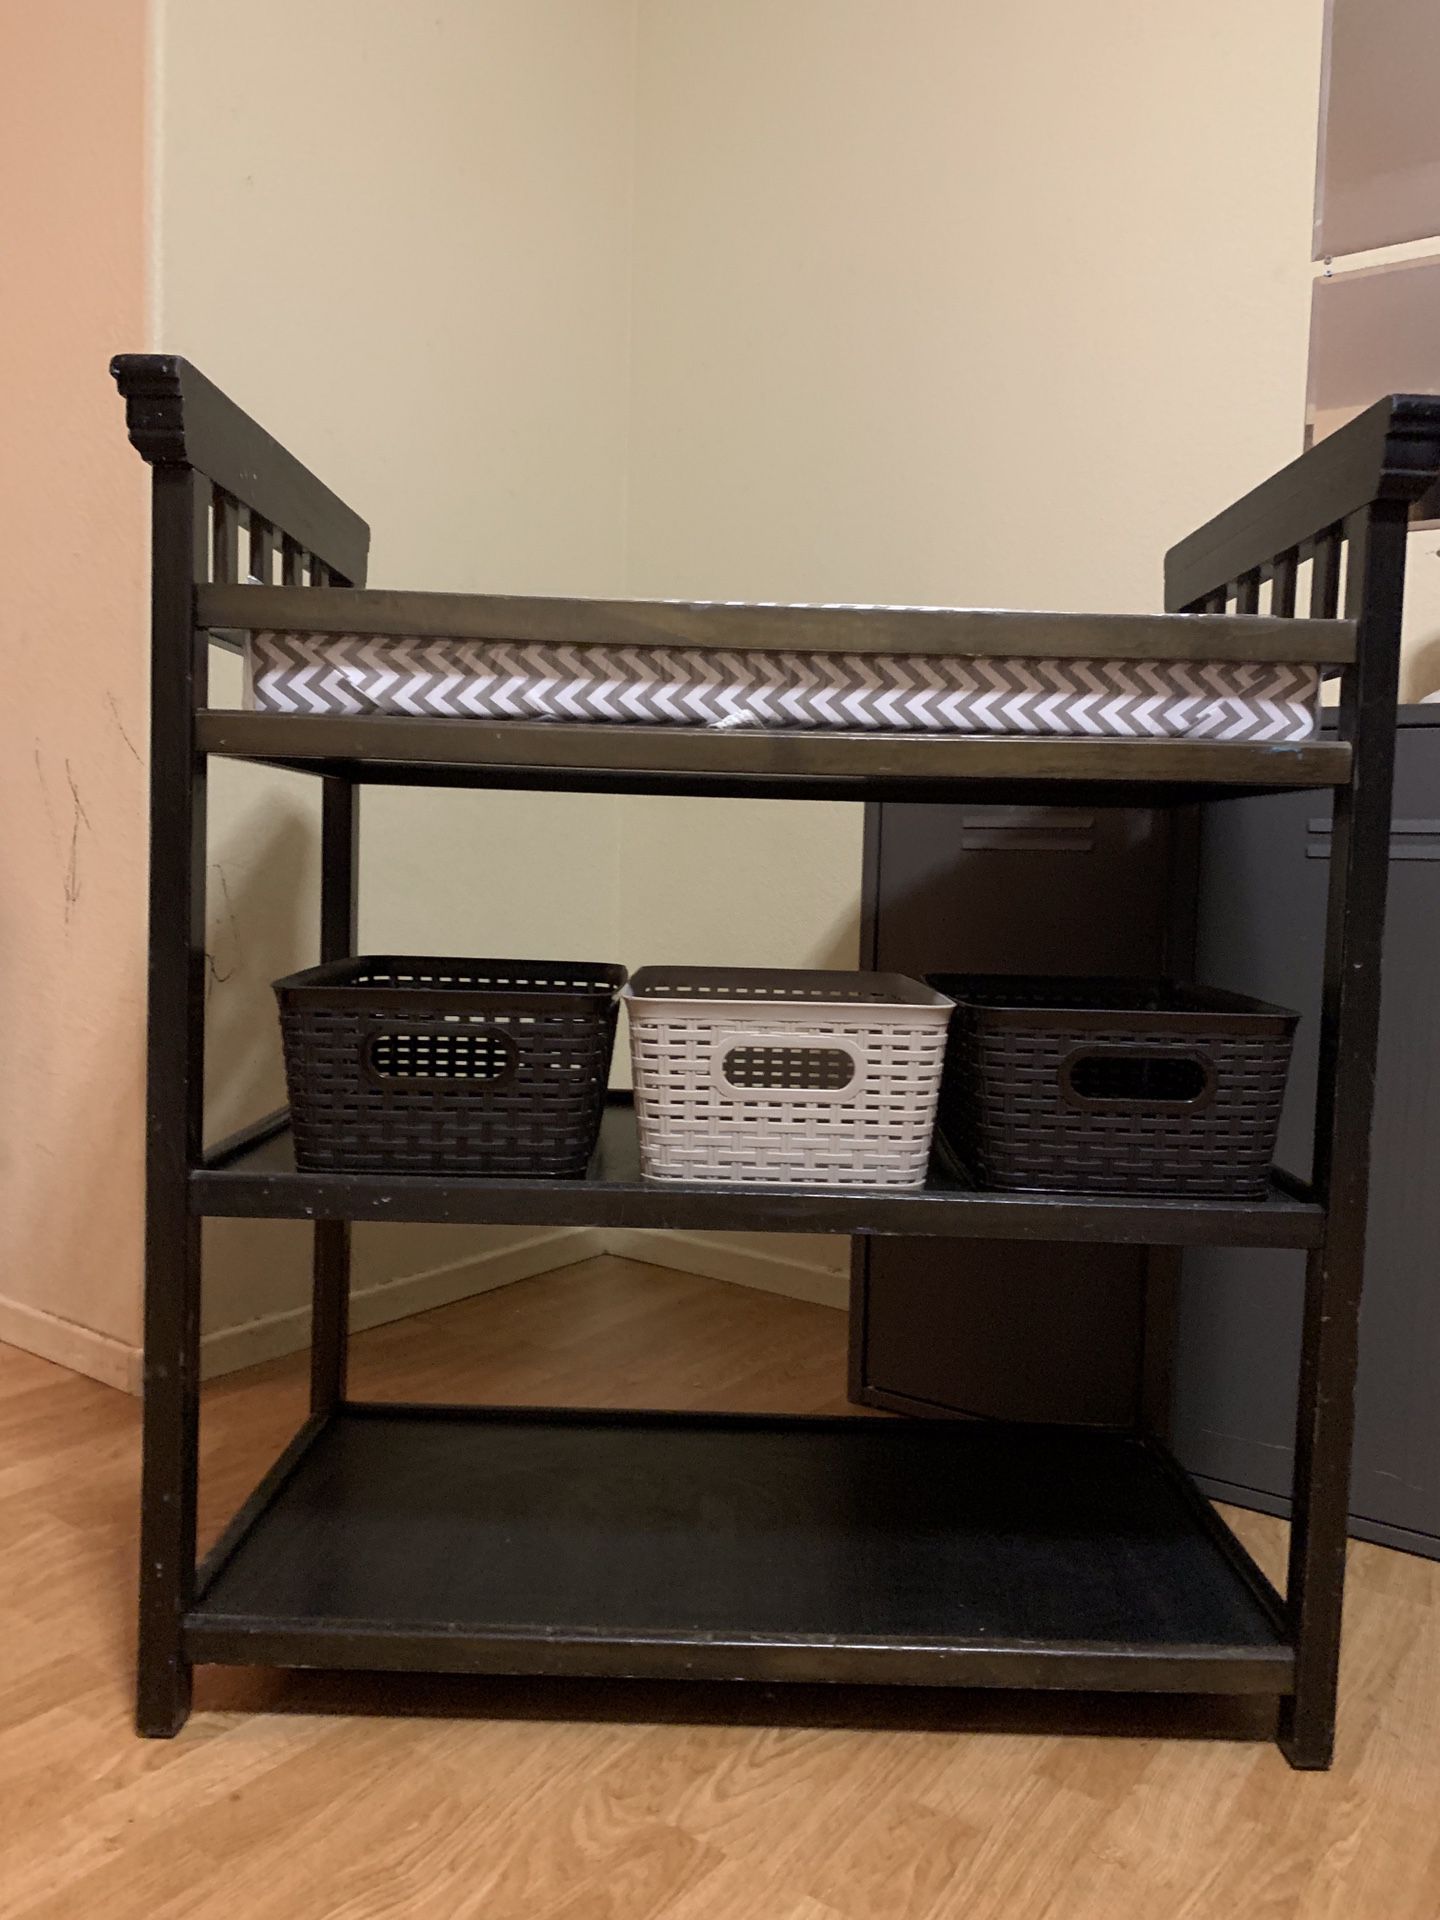 Changing table set